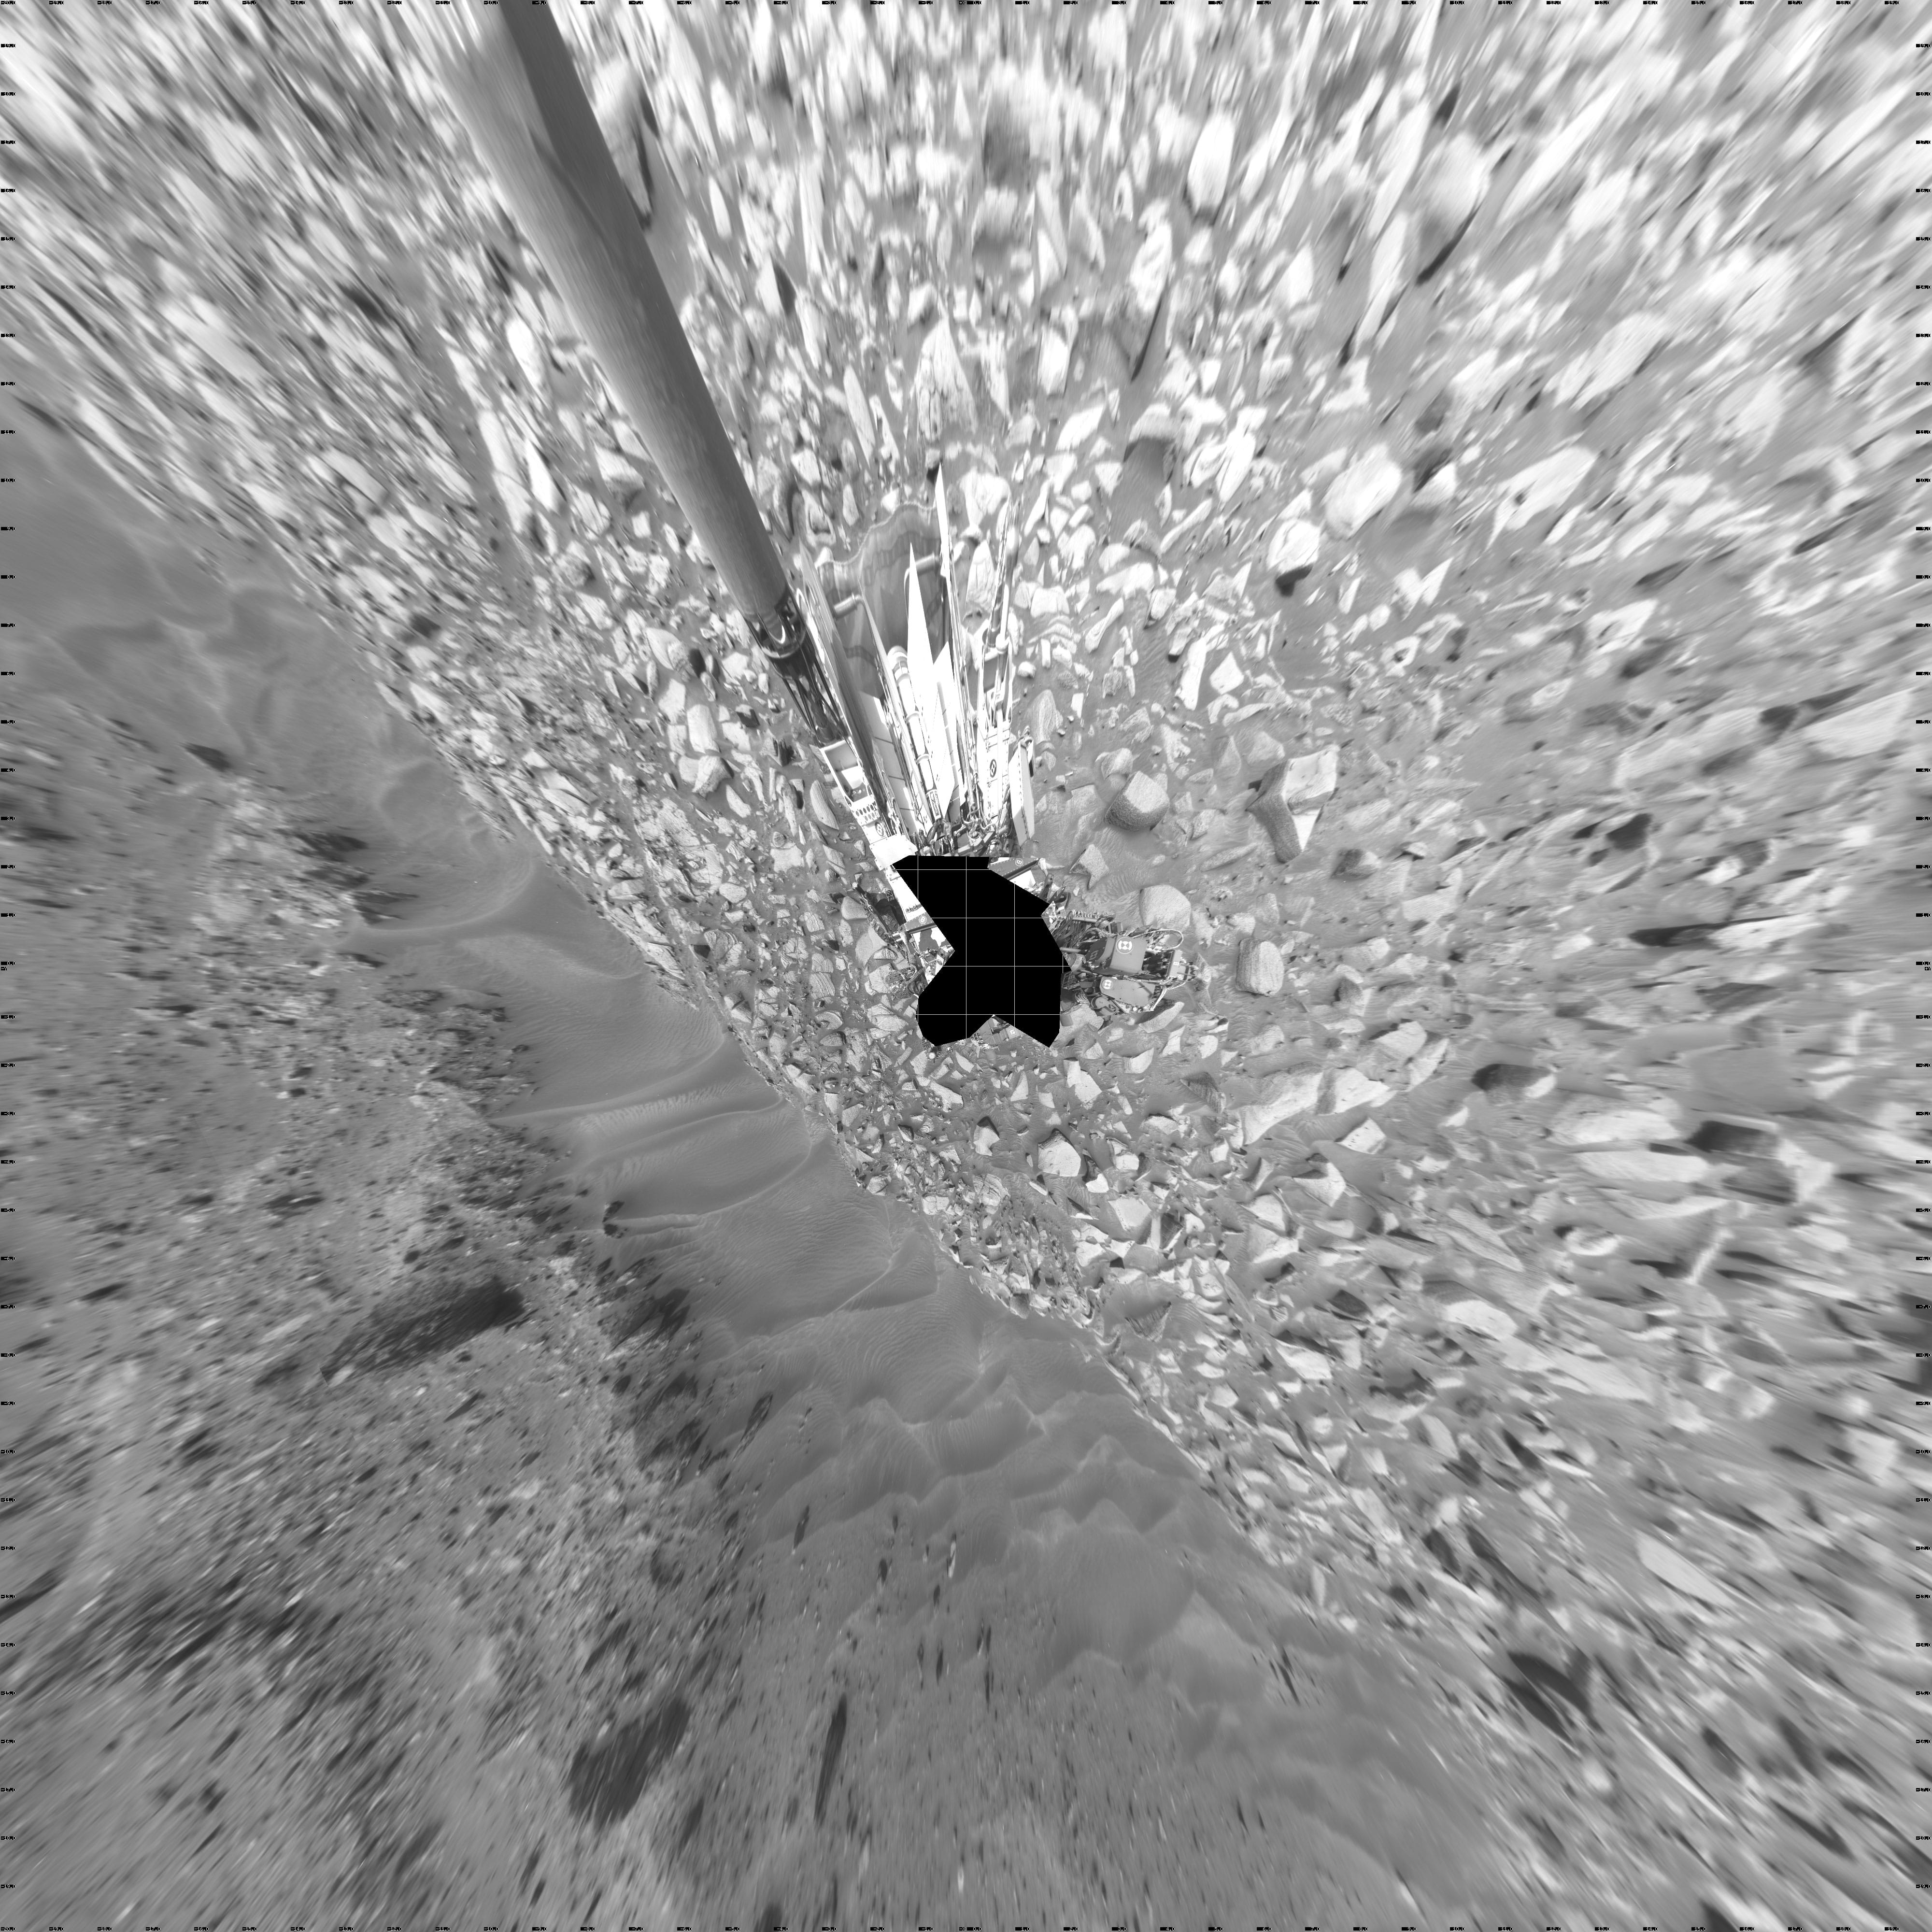 This projection provides an overhead view, but introduces distortion for items not on the surface, such as large rocks and the rover itself. Curiosity took the images on April 14, 2024, Sol 4155 of the Mars Science Laboratory mission at drive 2386, site number 106. The local mean solar time for the image exposures was 1 PM.